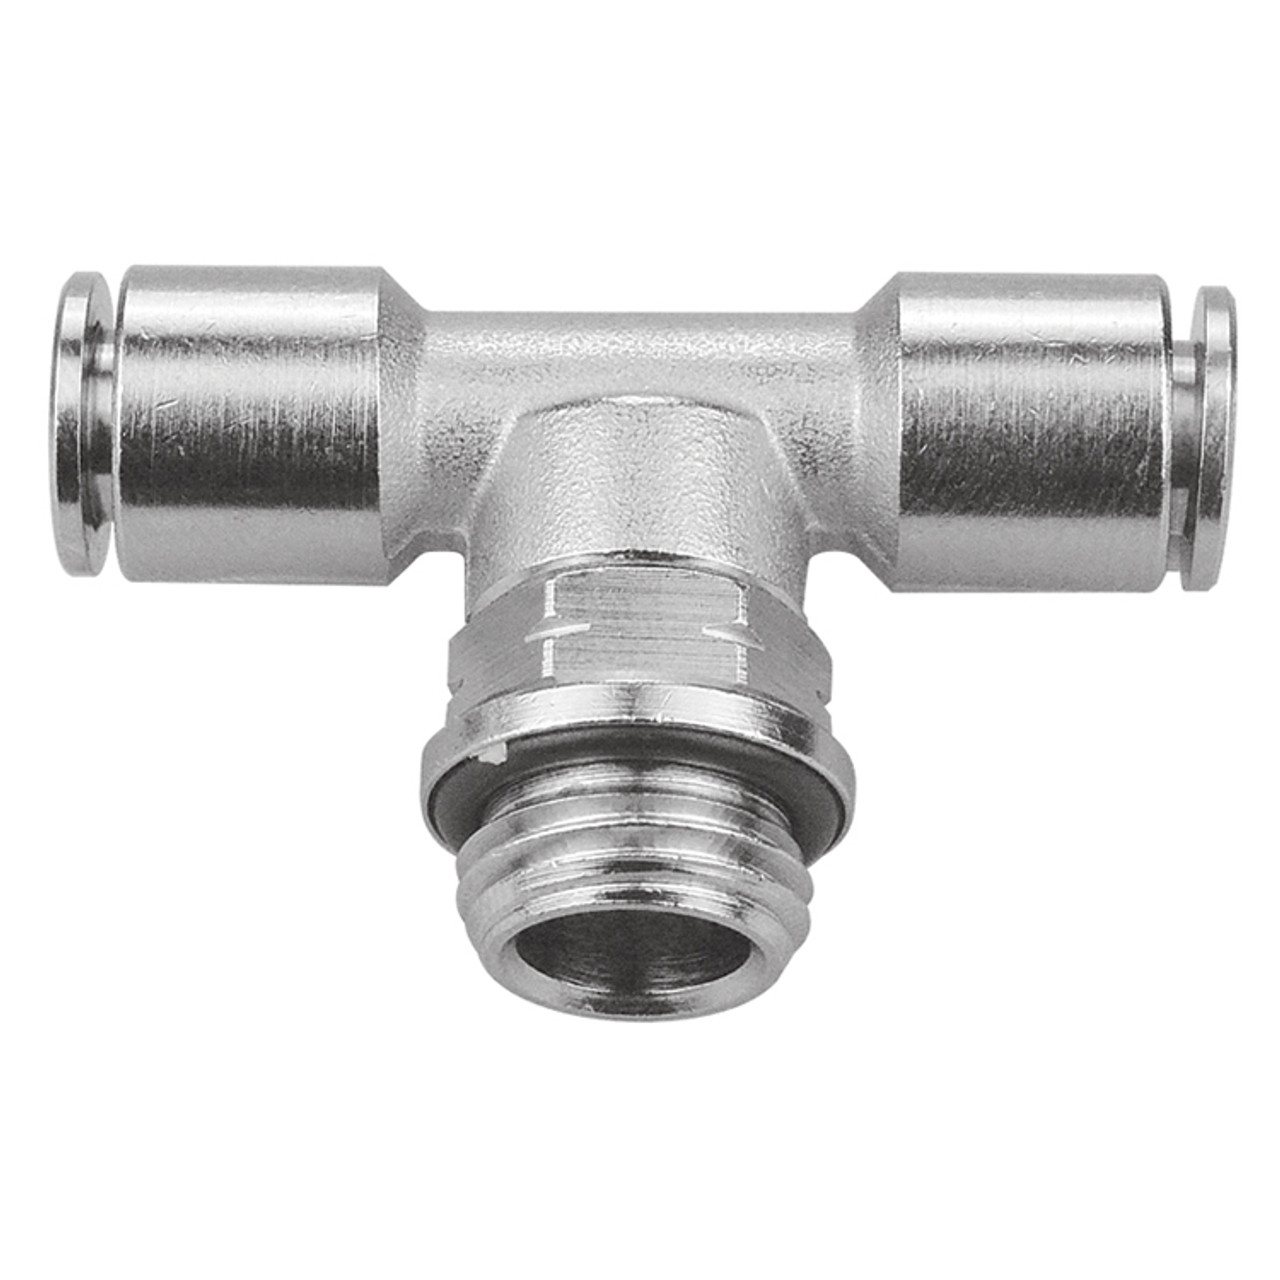 1/4 x 1/4 x 1/4" Nickel Plated Brass Uni Thread - Push-To-Connect - Push-To-Connect Tee   G60T6018P-04-04